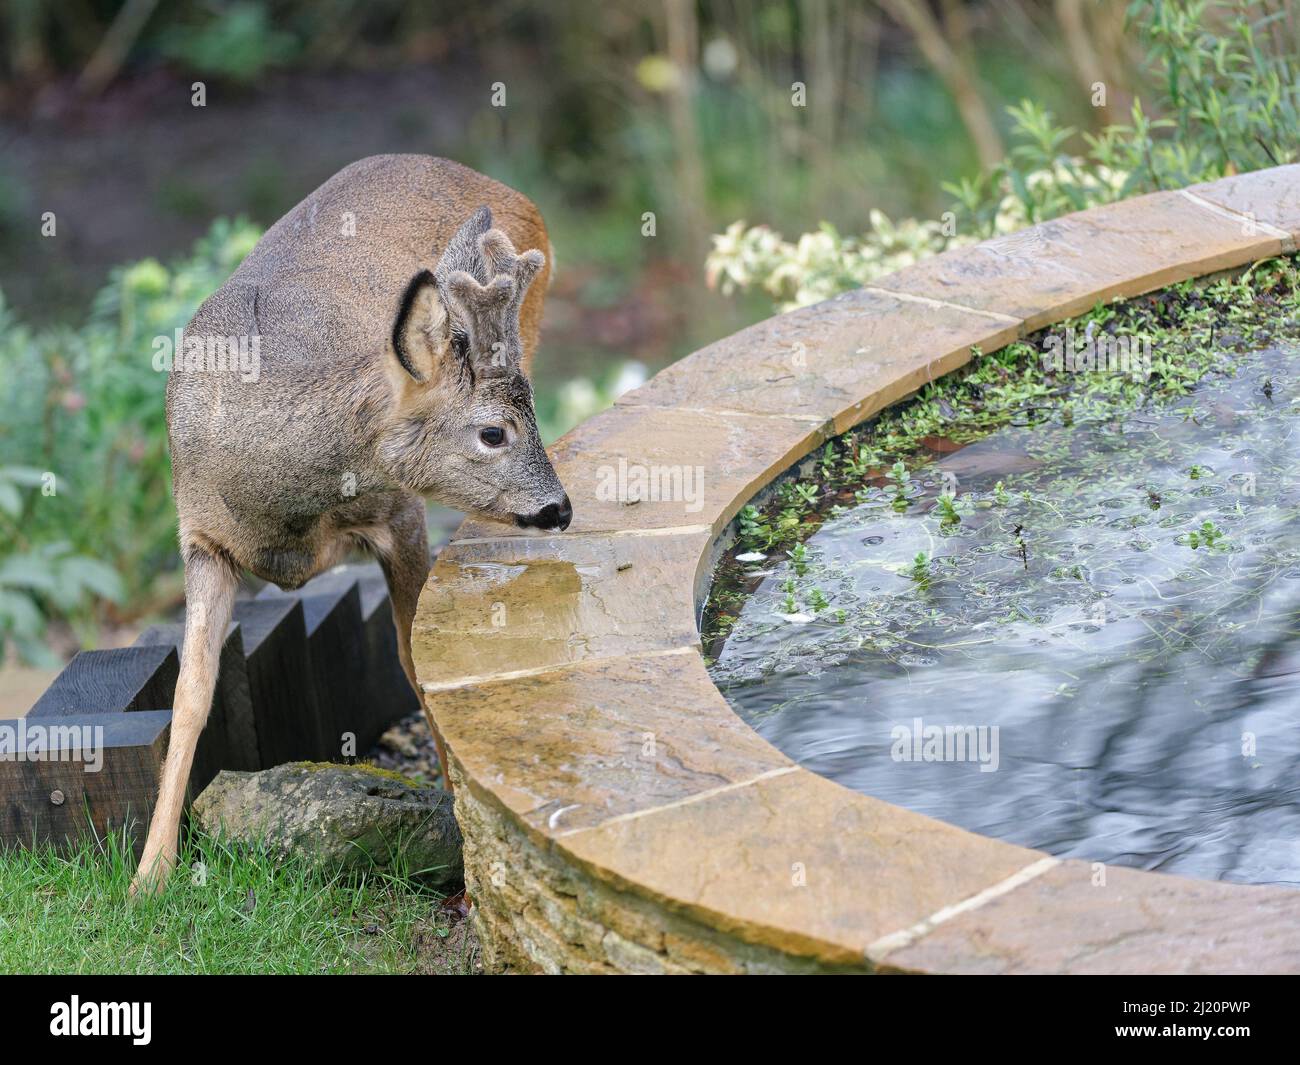 Young Roe deer (Capreolus capreolus) buck with developing horns in velvet approaching a garden pond, Wiltshire garden, UK, February. Stock Photo